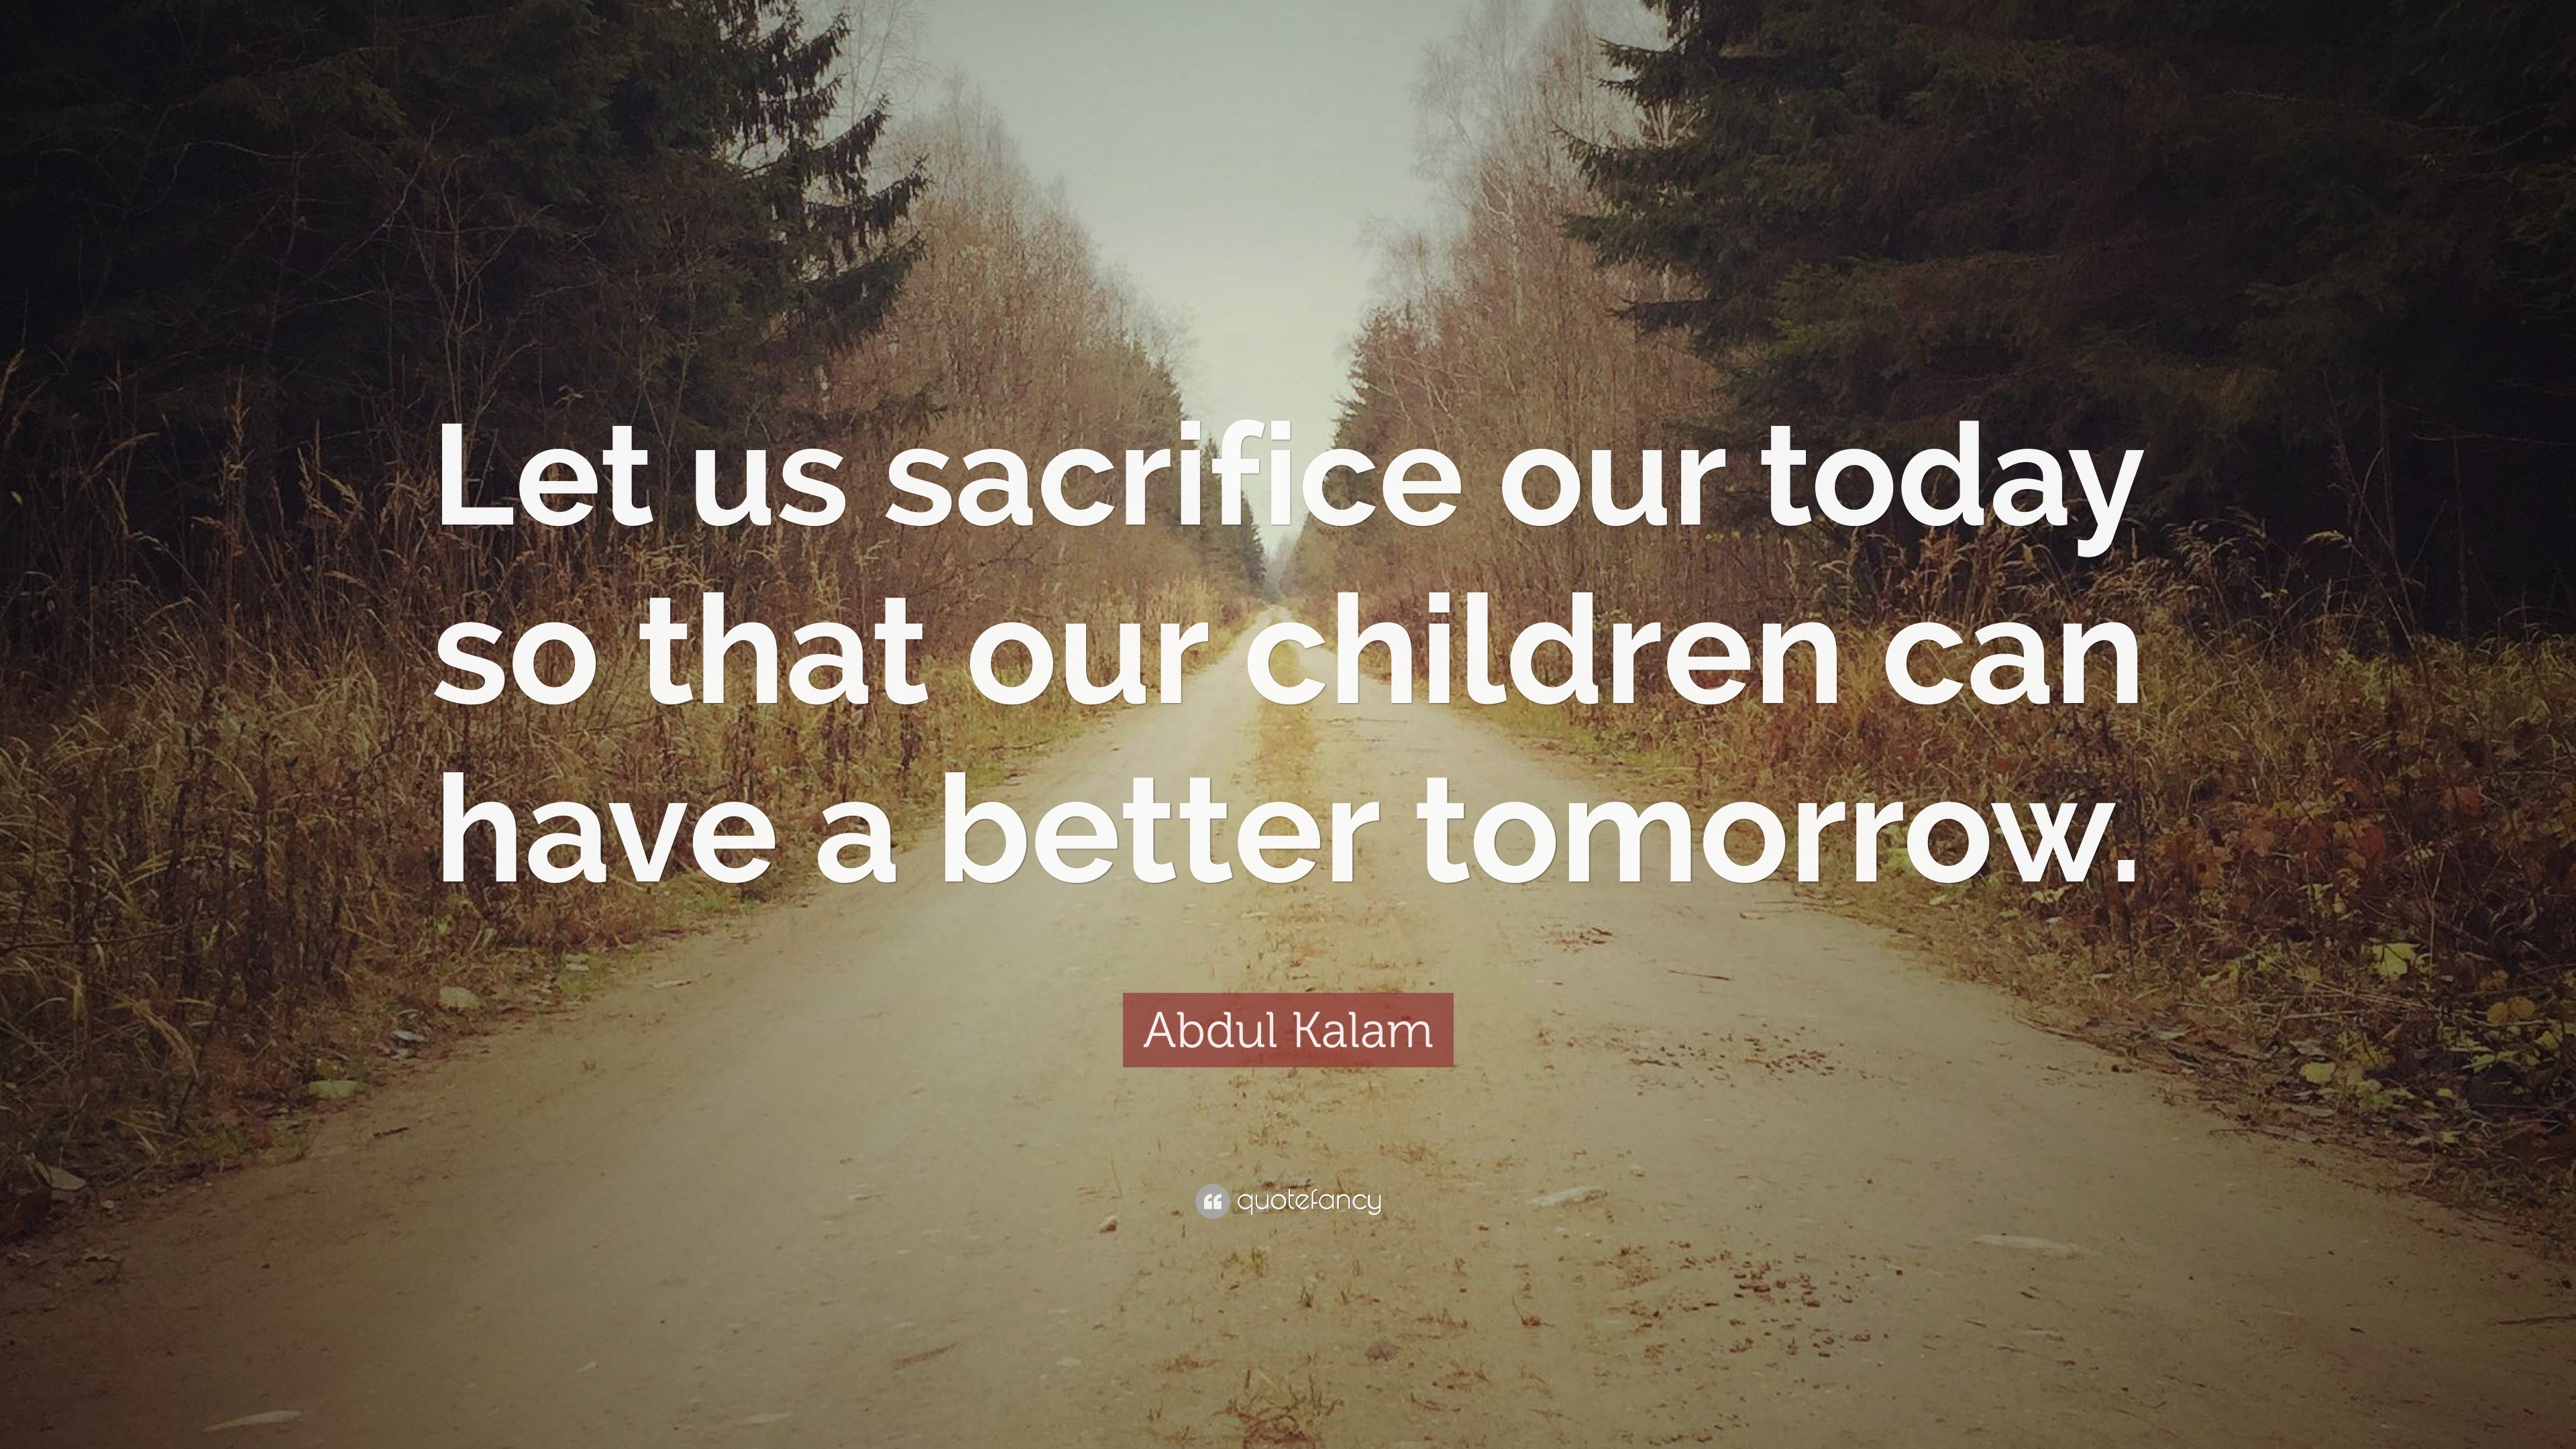 Abdul Kalam Quote: “Let us sacrifice our today so that our children can  have a better